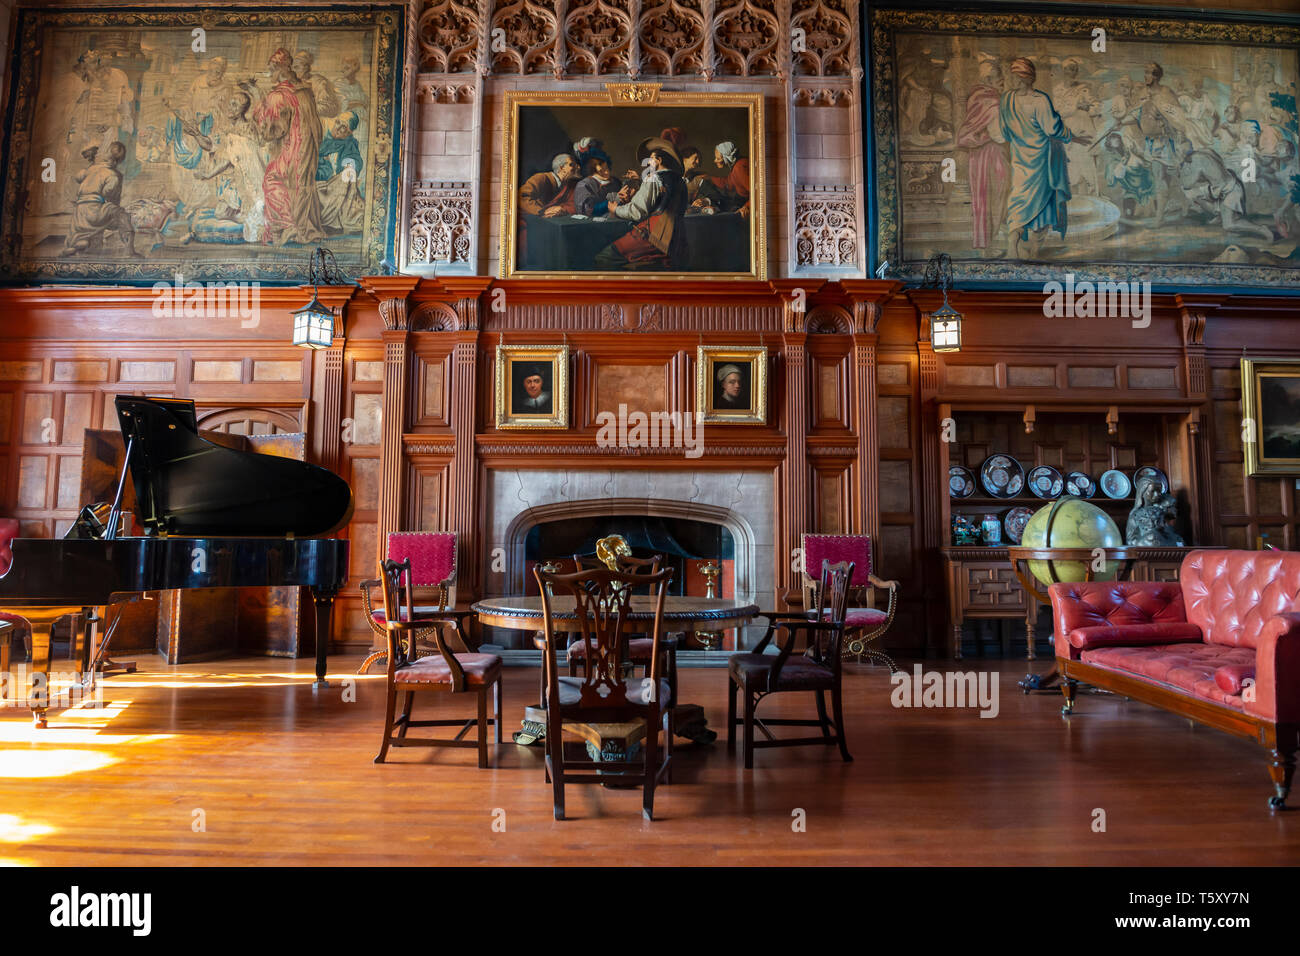 The Cross Hall, part of the State Rooms, at Bamburgh Castle, Northumberland, England, UK Stock Photo